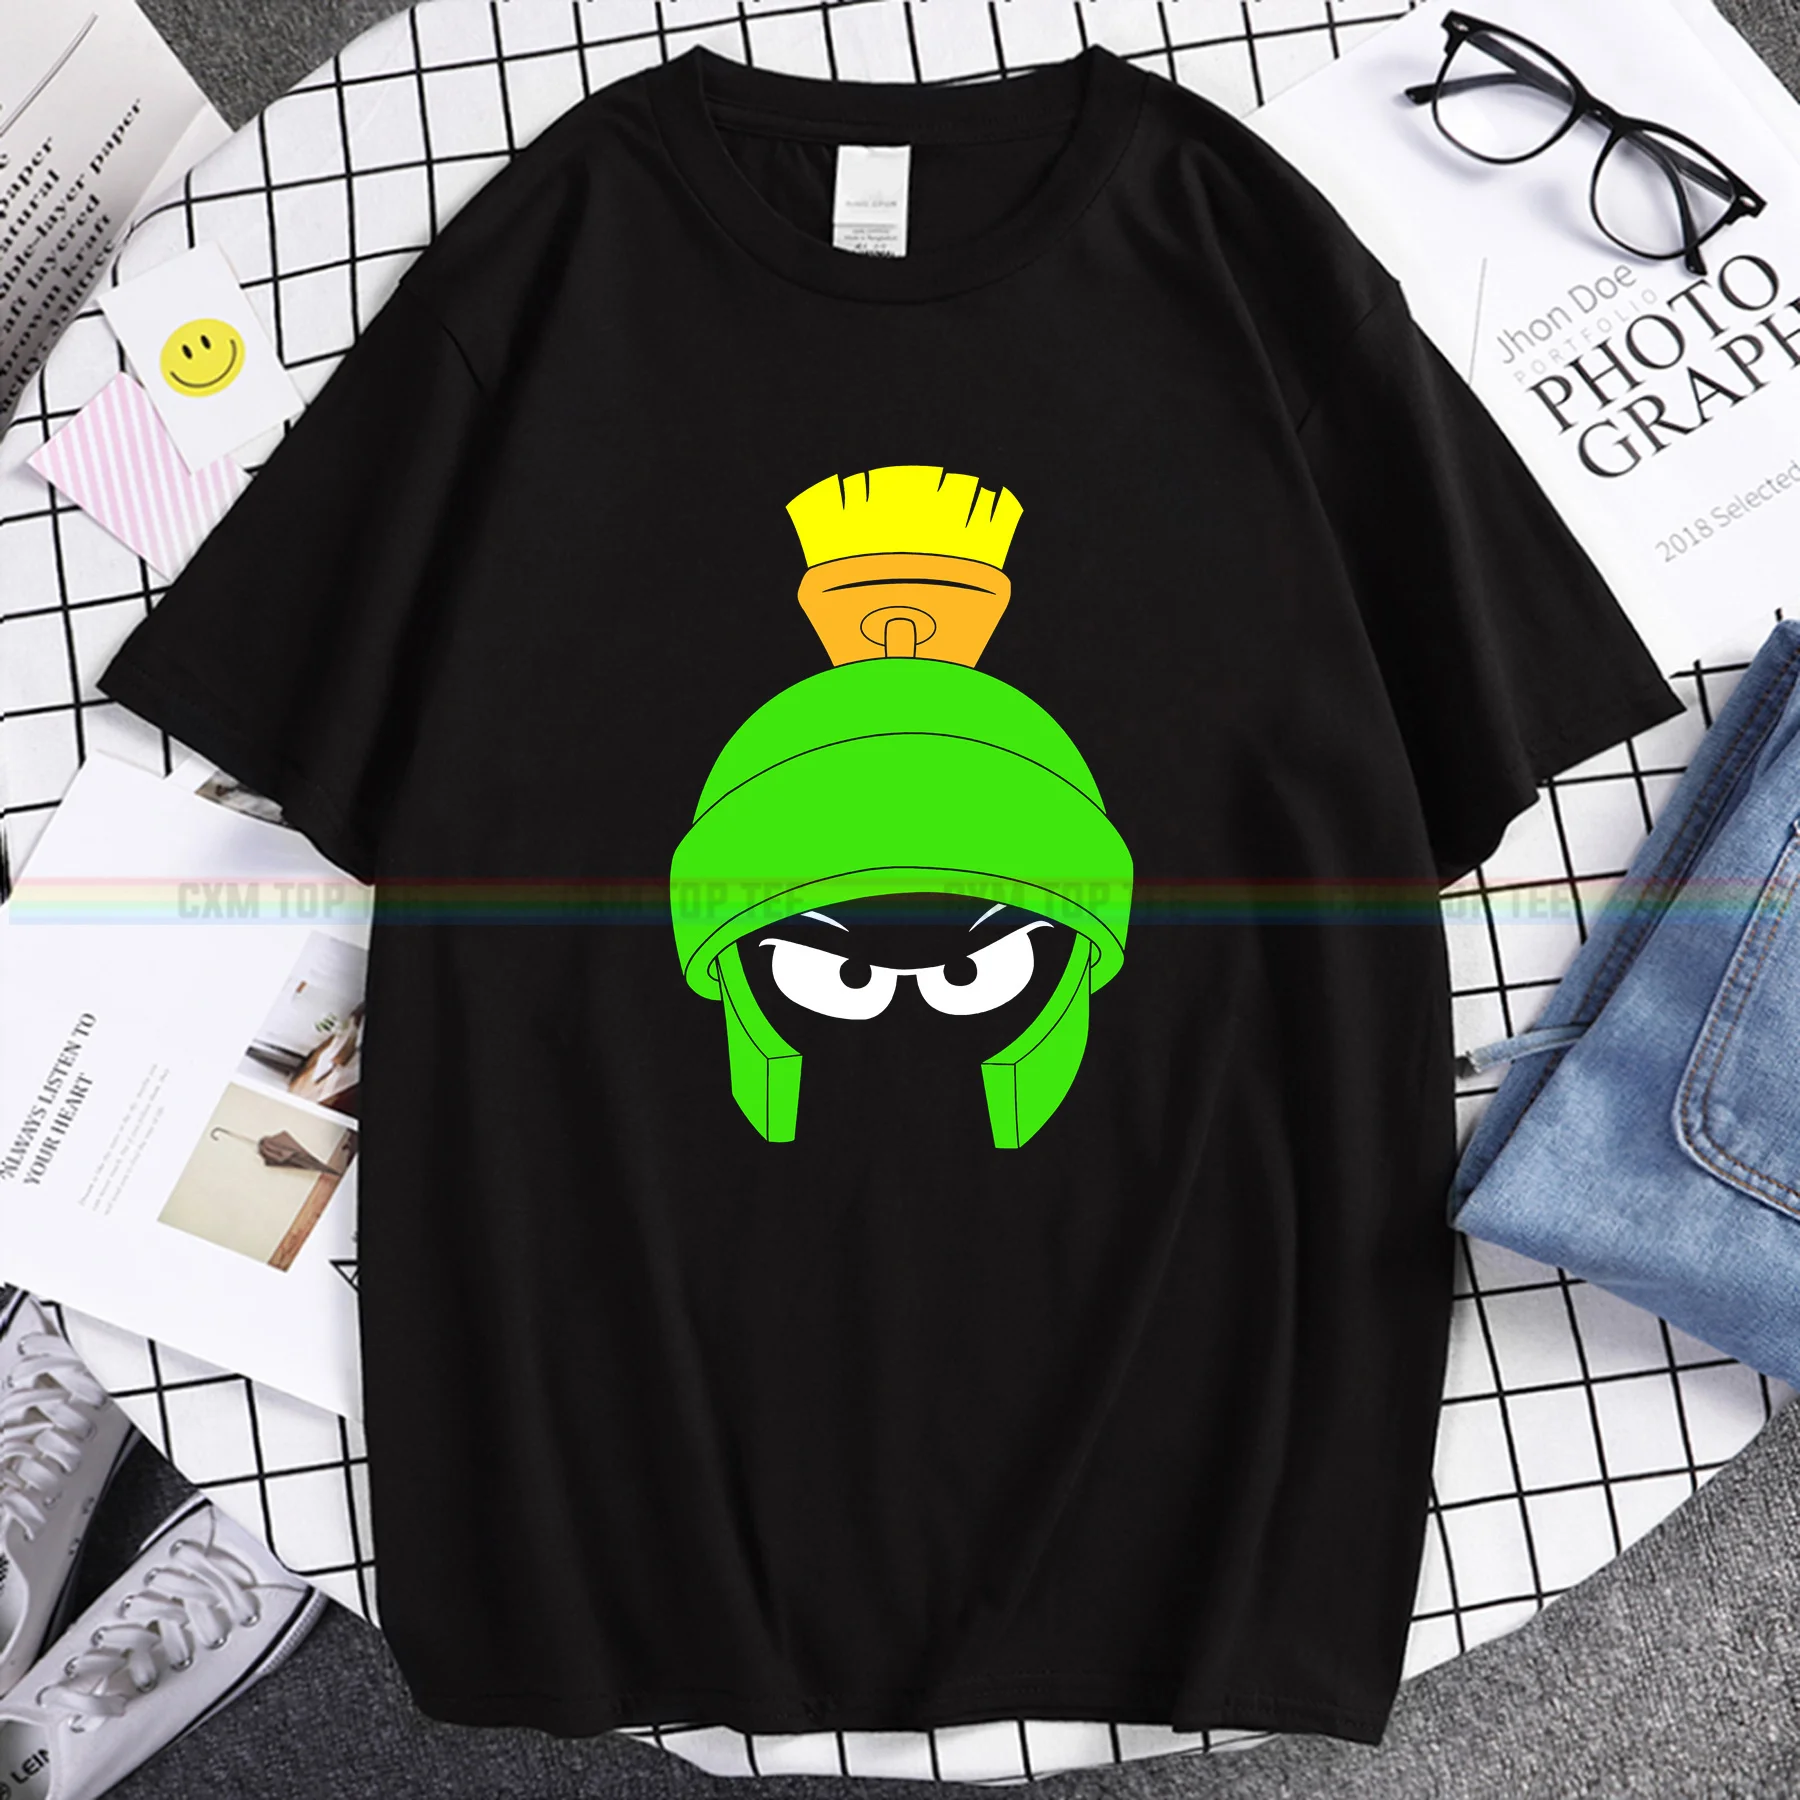 

Amazing male Tees Men t-shirt Casual Unique Oversized Looney Tunes Marvin The Martian Dark Big Face T-shirt women T-shirts